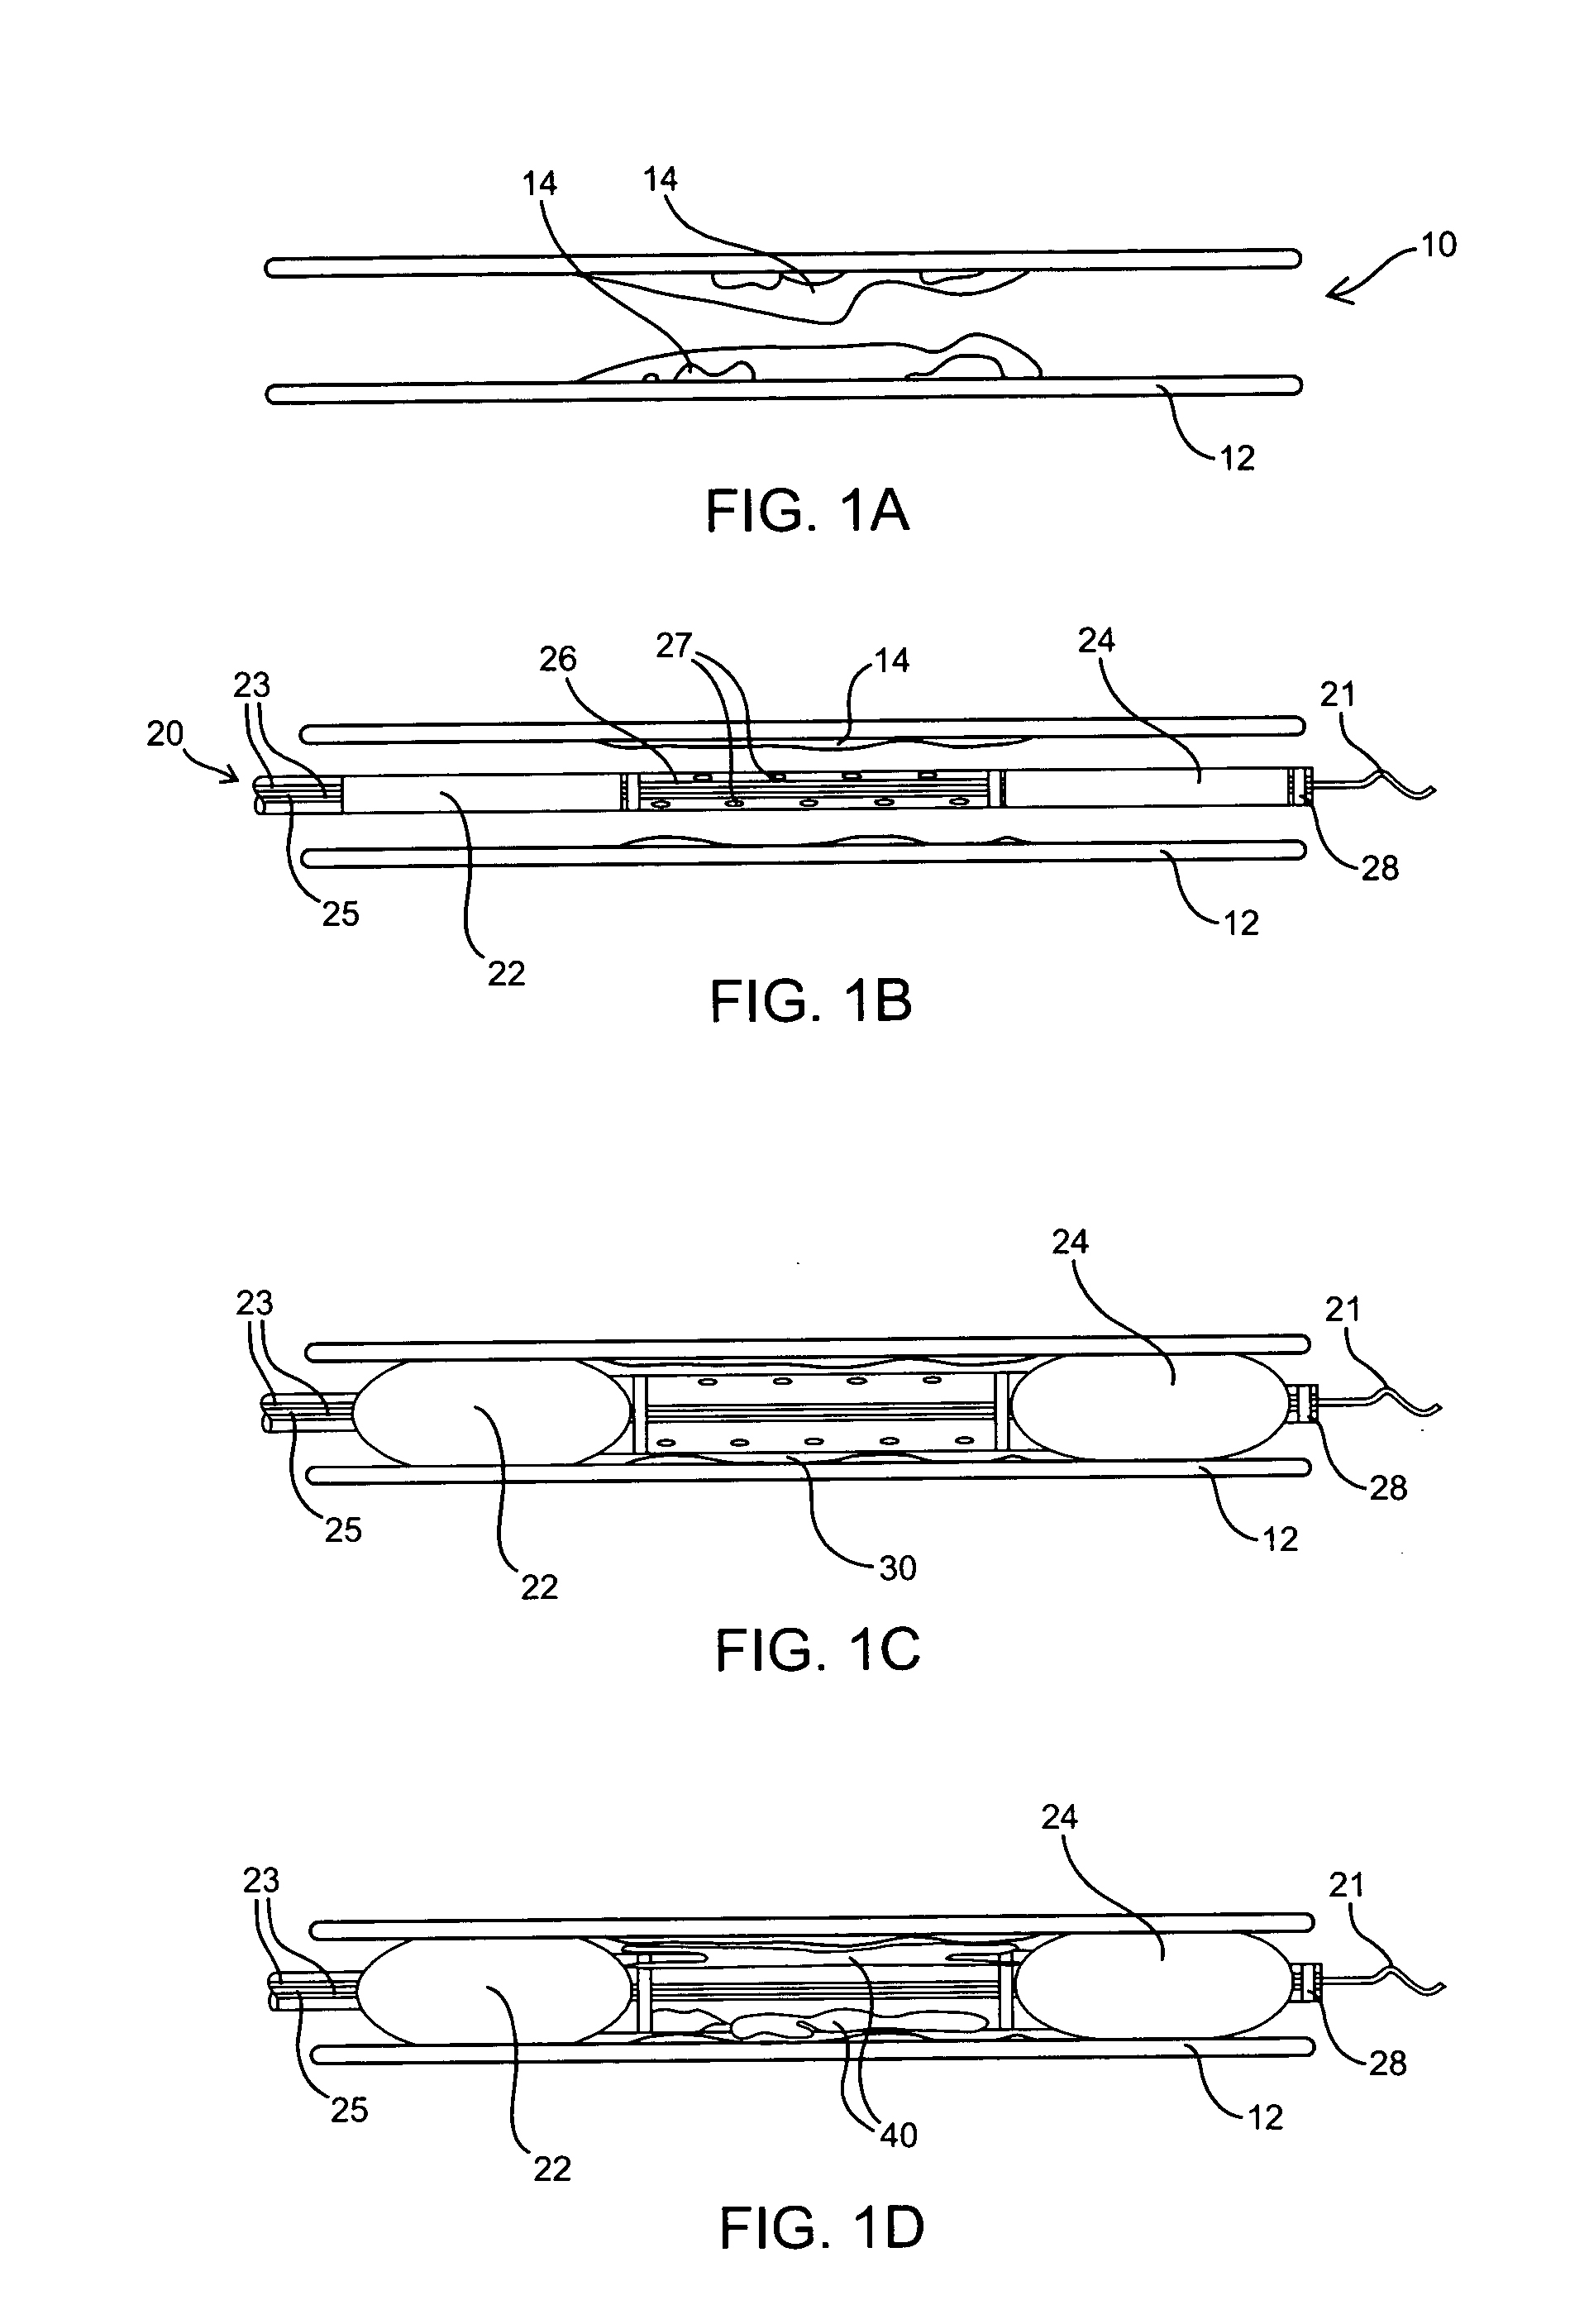 Biocompatible phase invertable proteinaceous compositions and methods for making and using the same